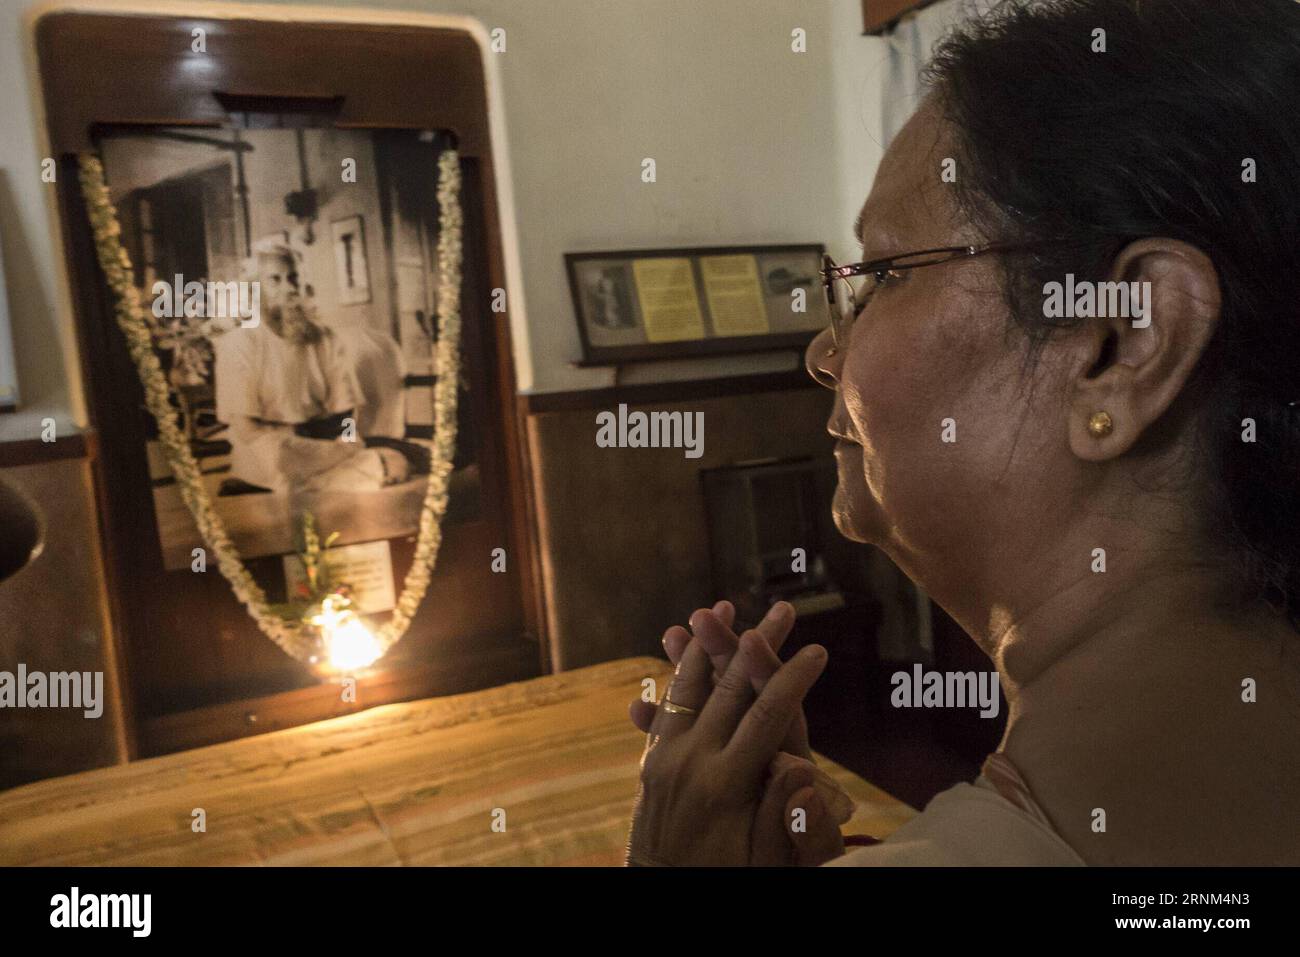 (170509) -- KOLKATA, May 9, 2017 -- An Indian woman visits the museum at Nobel laureate poet Rabindranath Tagore s house during the celebration on the 156th birth anniversary of Tagore in Kolkata, capital of eastern Indian state West Bengal on May 9, 2017. Tagore was the first Asian to win Nobel Prize for his collection of poems Geetanjali in 1913. ) (zjy) INDIA-KOLKATA-TAGORE-BIRTH ANNIVERSARY TumpaxMondal PUBLICATIONxNOTxINxCHN   Kolkata May 9 2017 to Indian Woman visits The Museum AT Nobel Laureate Poet Rabindranath Tagore S House during The Celebration ON The 156th Birth Anniversary of Tag Stock Photo